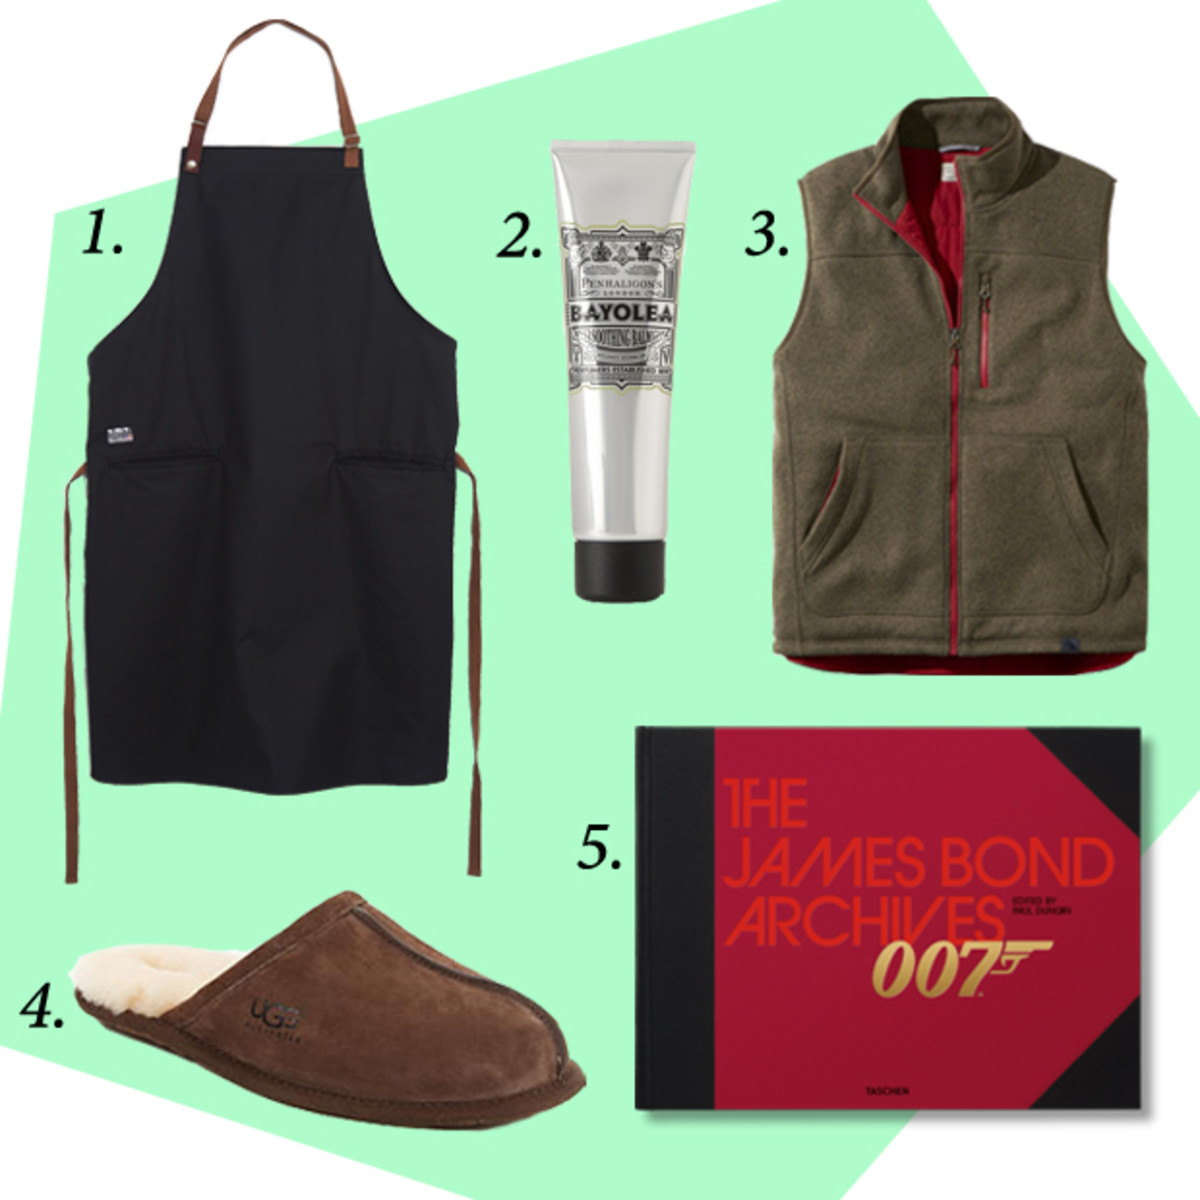 1. Tilit Contra Apron, $85, available at TilitChefGoods.com. 2. Penhaligon’s Bayolea After Shave Soothing Balm, $55, available at MrPorter.com. 3. L.L. Bean Bean’s Sweater Fleece PrimaLoft Vest, $89, available at LLBean.com. 4. UGG Australia Scuff Slippers, $80-$90, available at SaksFifthAvenue.com. 5. The James Bond Archives: 'Spectre' Edition, $69.99, available at Taschen.com.